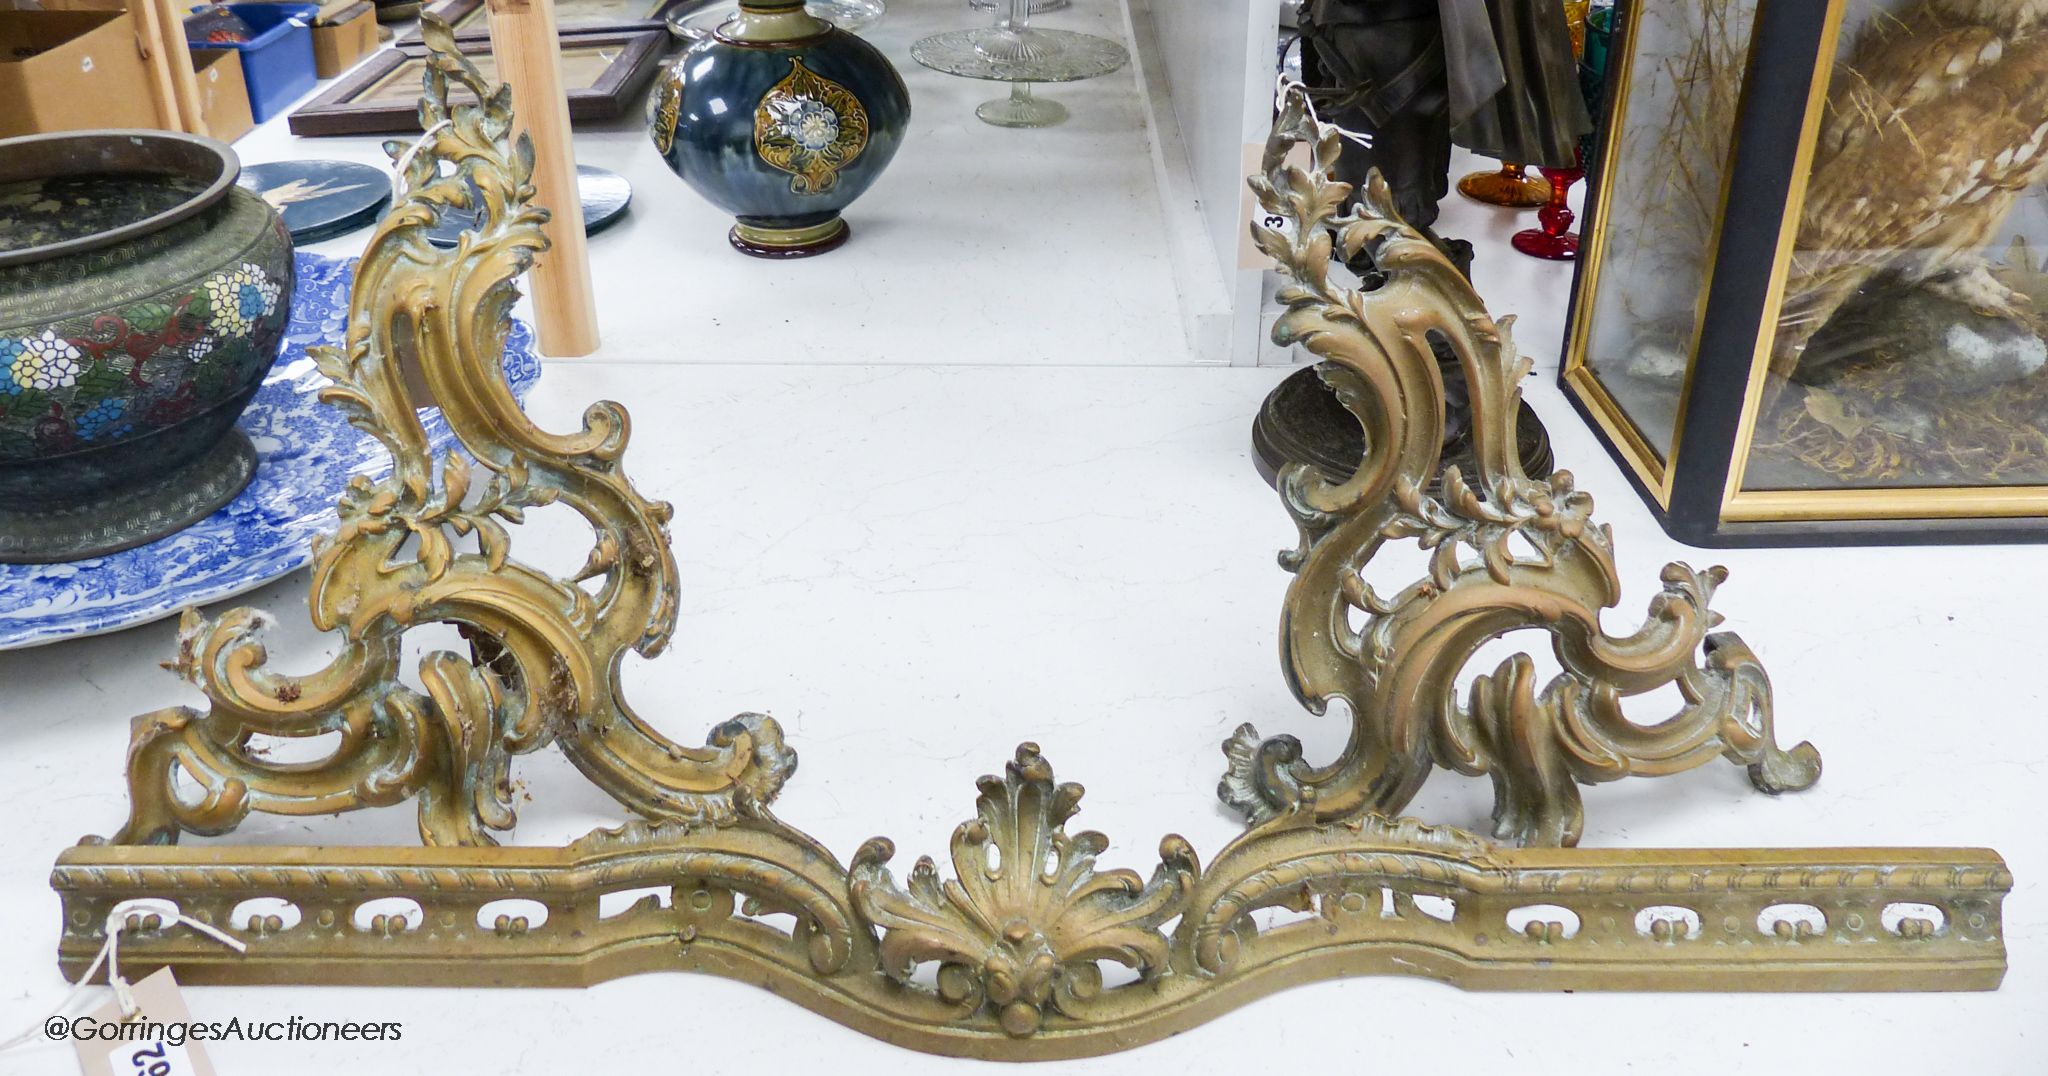 A pair of 19th century French rococo style ormolu andirons with linking fender